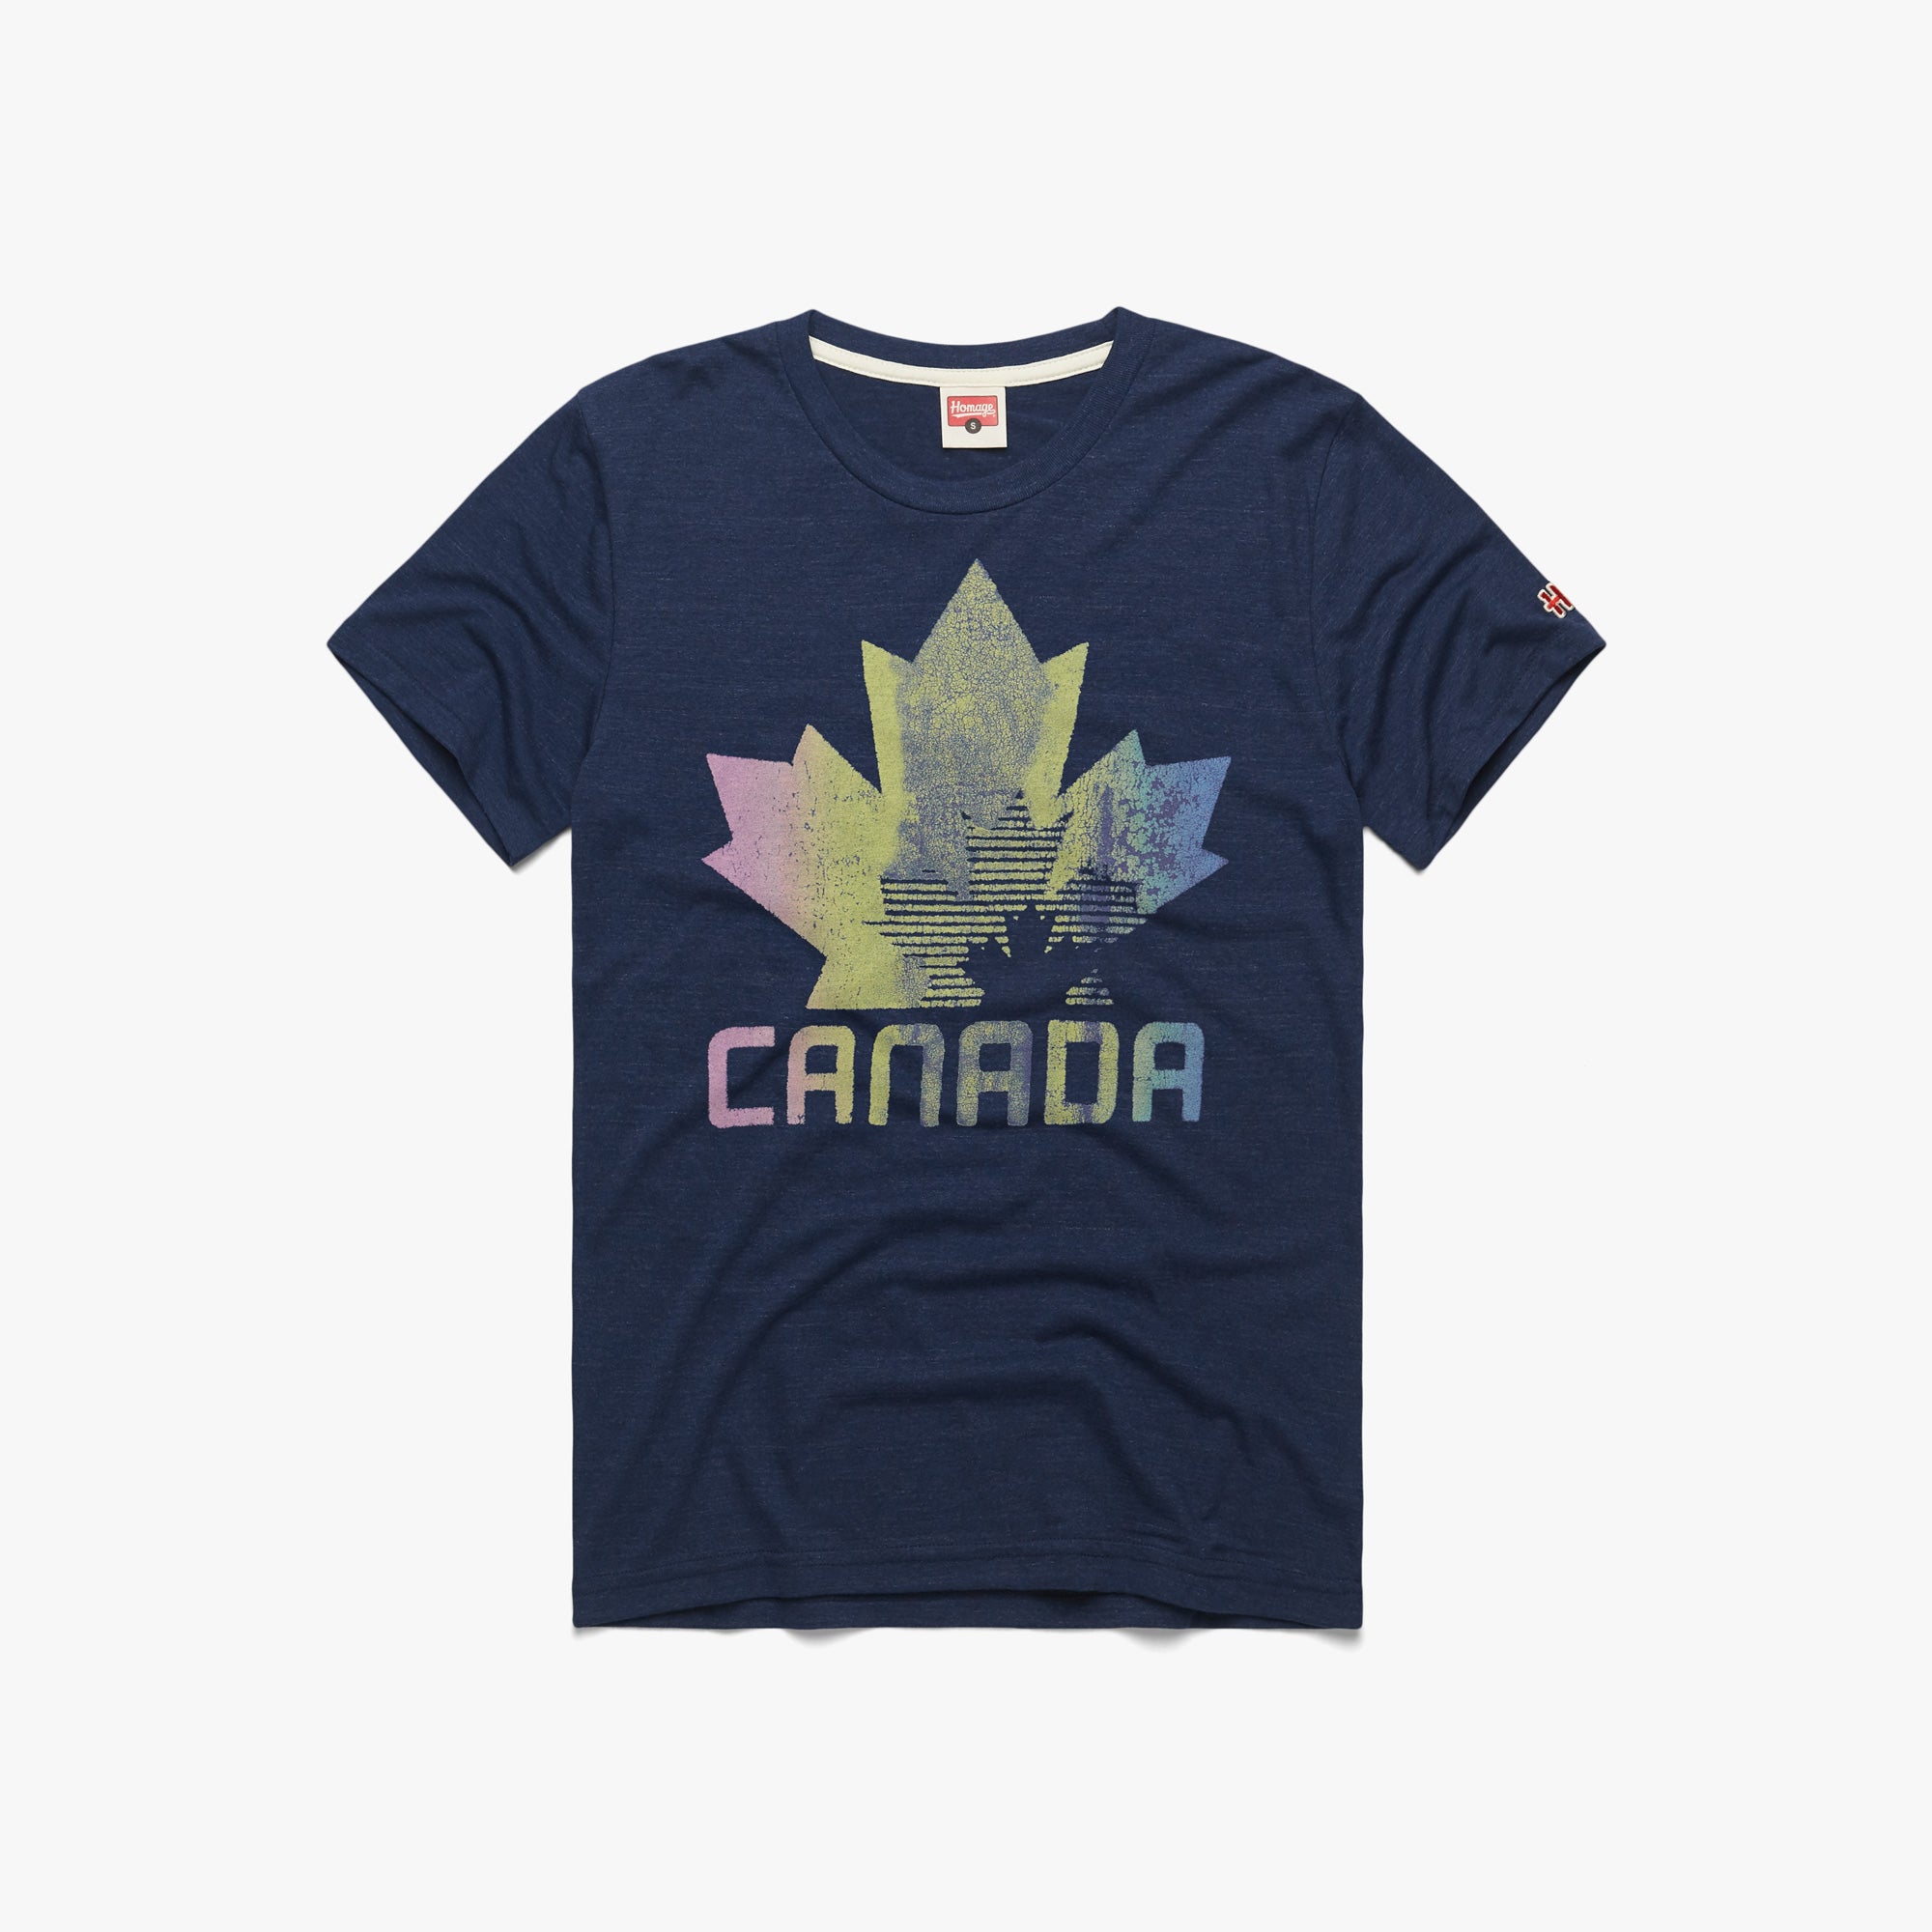 Canada T-Shirt from Homage. | Navy | Vintage Apparel from Homage.